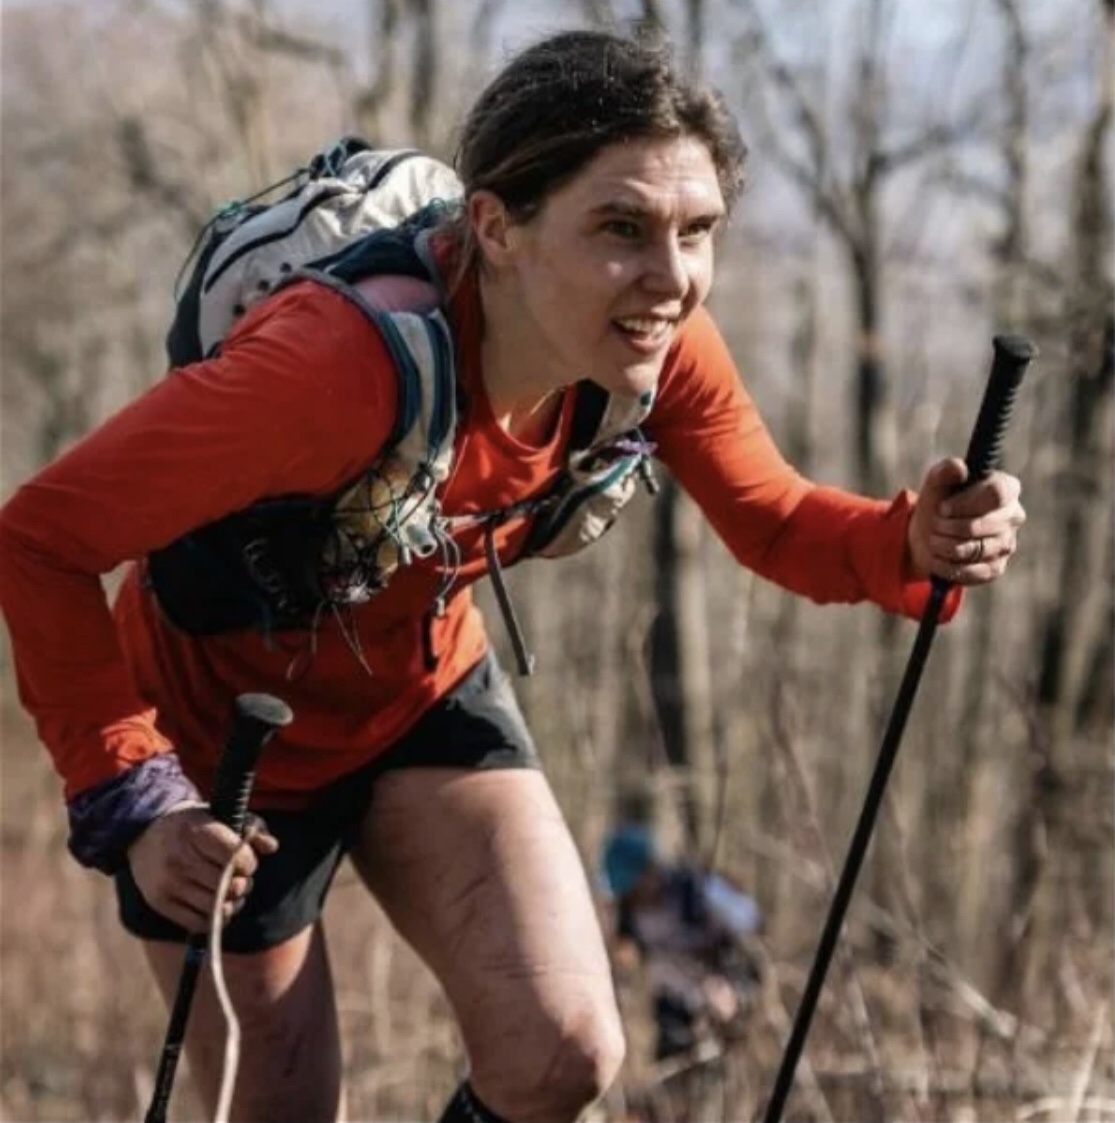 Congratulations to @JasminKParis on finishing the Barkley Marathons!!
She became the first woman in the event's 38-year history to complete the grueling course.
Jasmin Paris’ historic achievement serves as an inspiration for more diversity in the world of endurance sports. #bm100